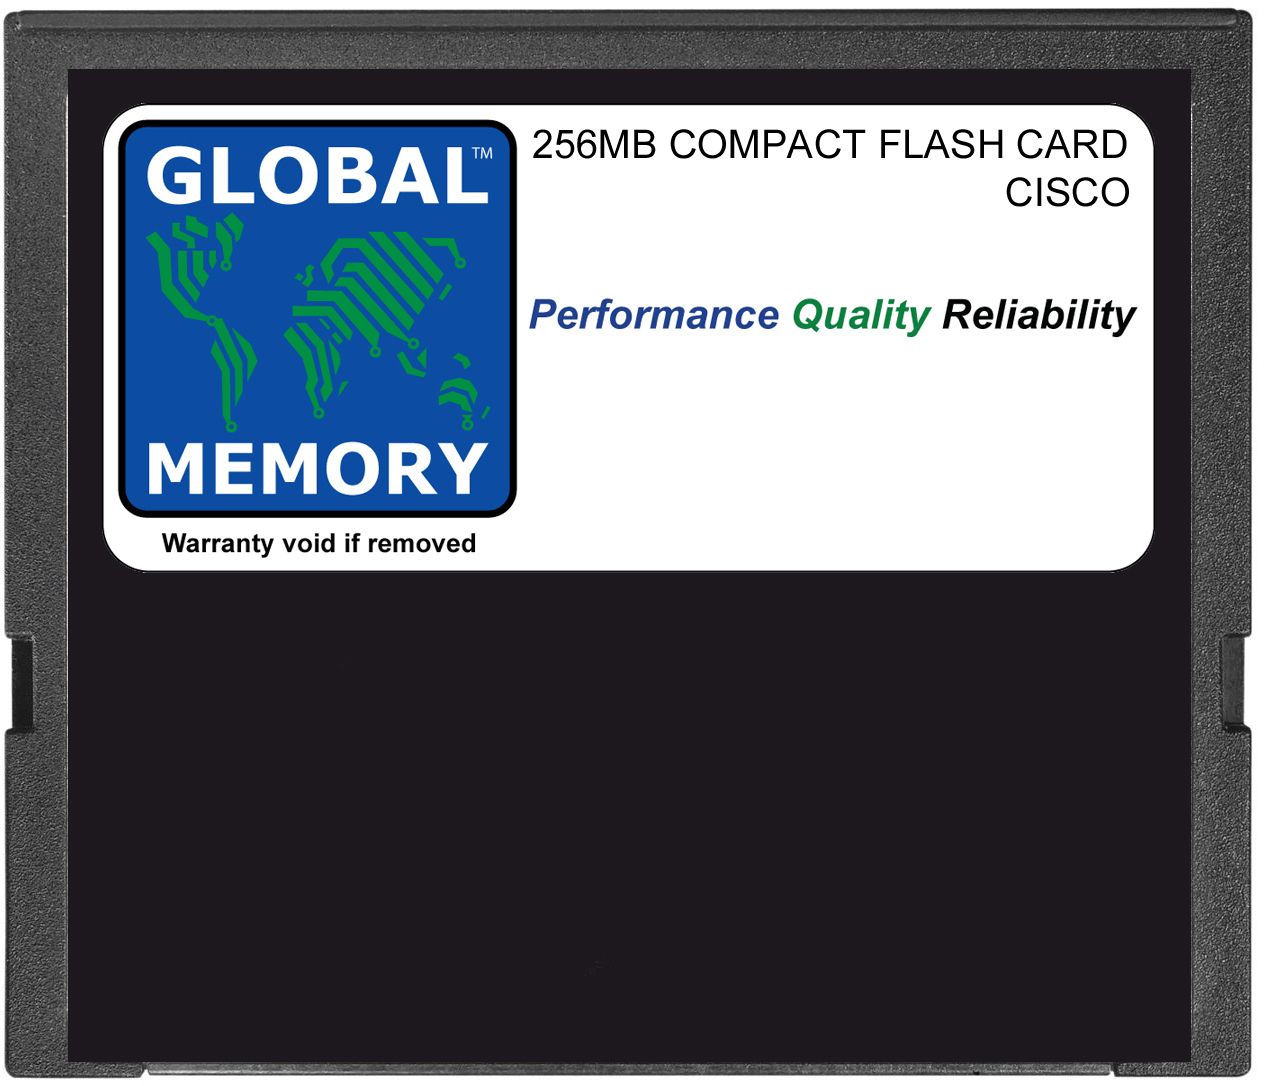 256MB COMPACT FLASH CARD MEMORY FOR CISCO 7200 SERIES ROUTERS NPE-G1 (MEM-NPE-G1-FLD256)